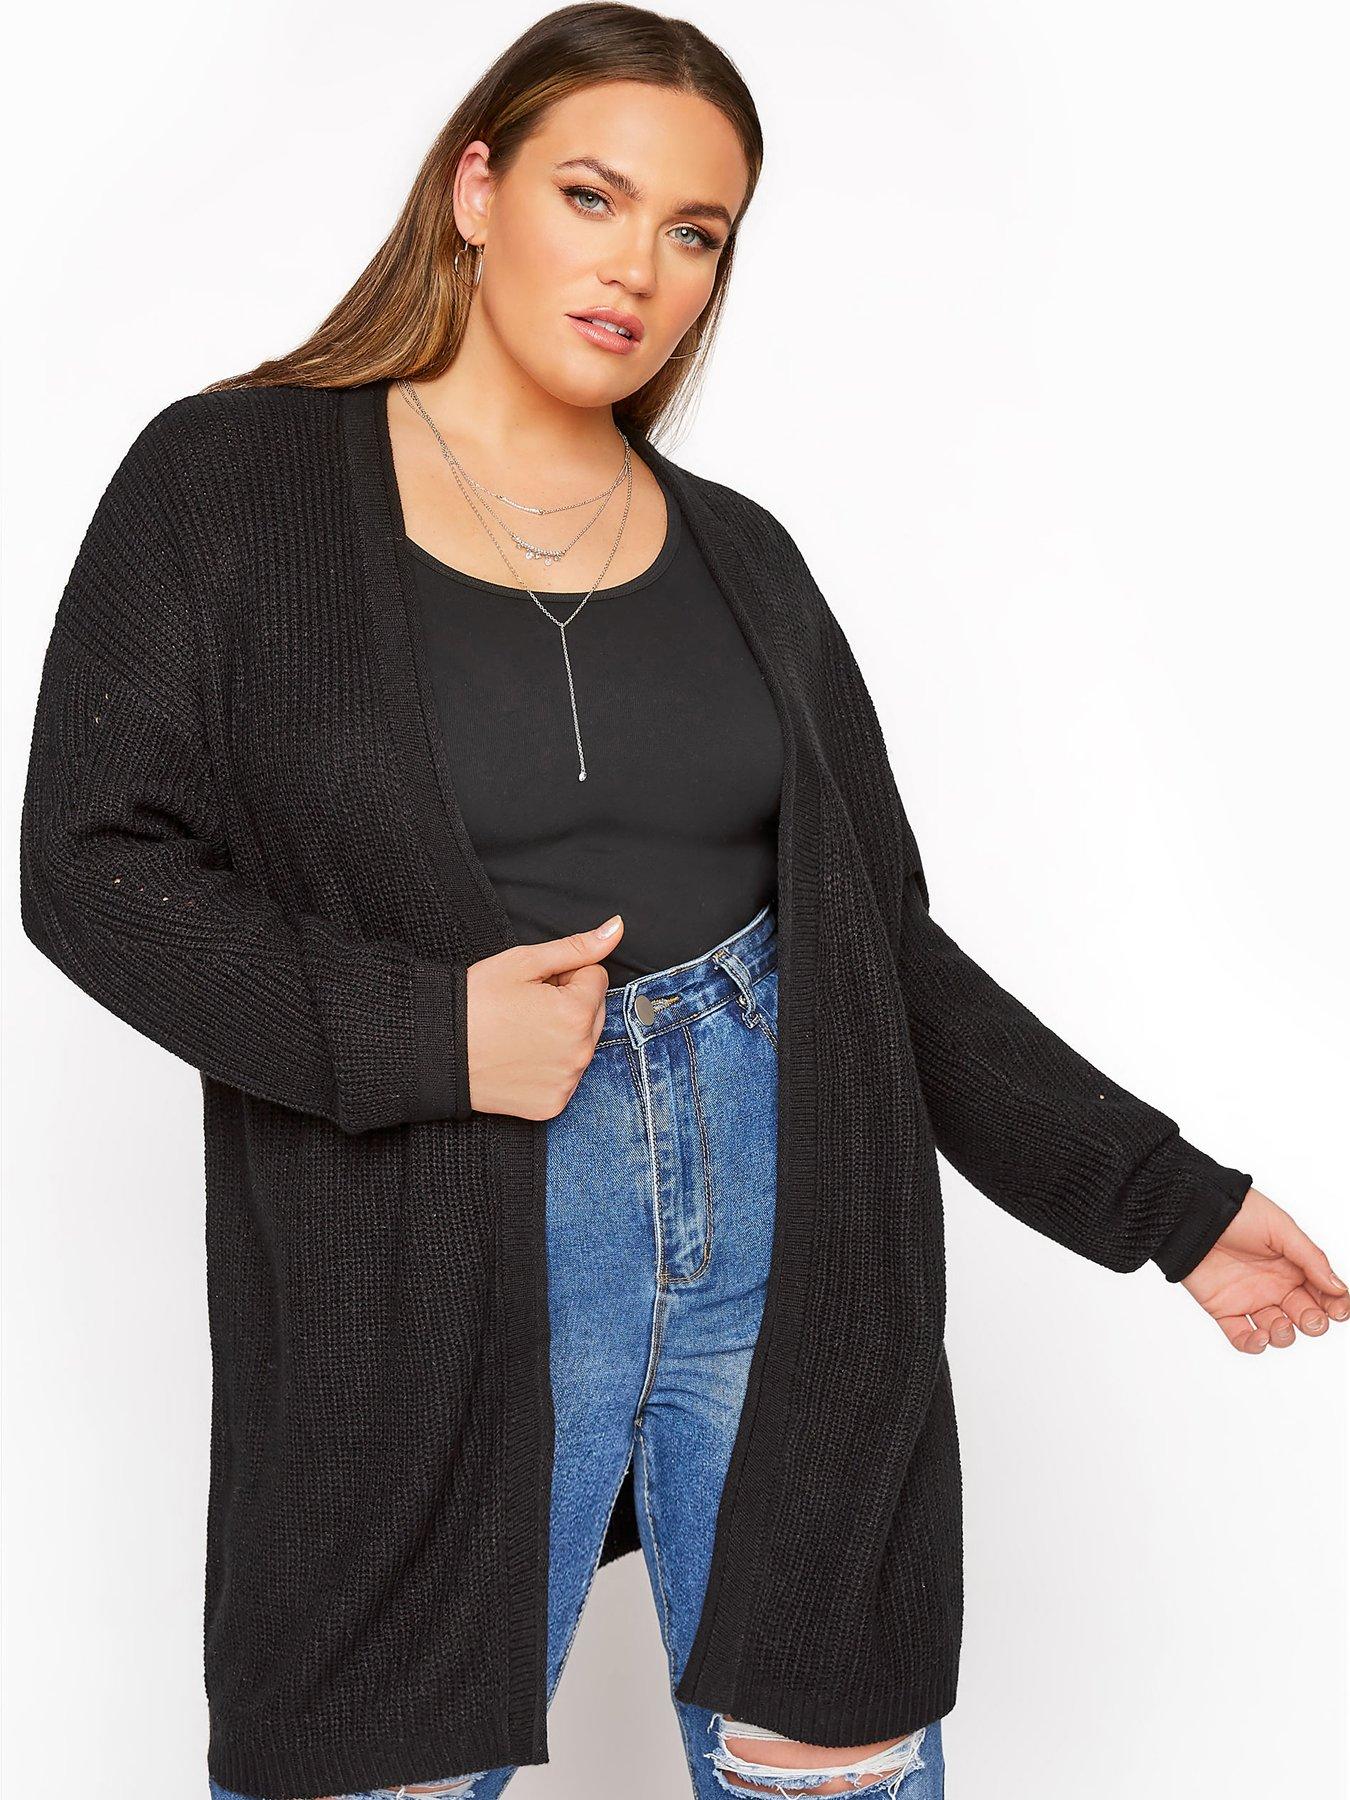  Yours New Cardigan - Black